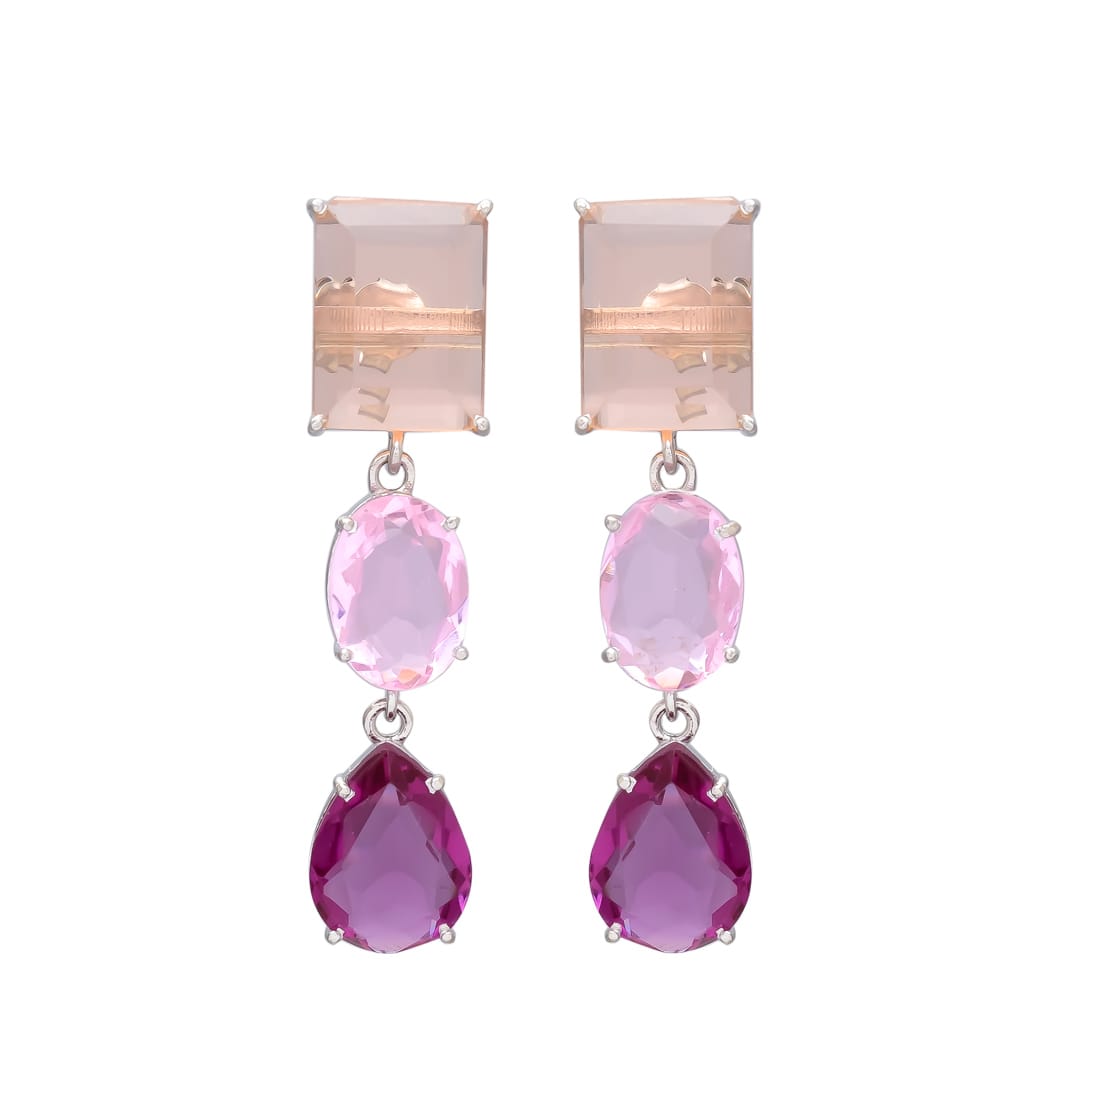 Melange Milie Sterling Silver Graduated Drop Earrings - Pink Tourmaline Hydro & Pink Quartz Hydro & Champagne Hydro